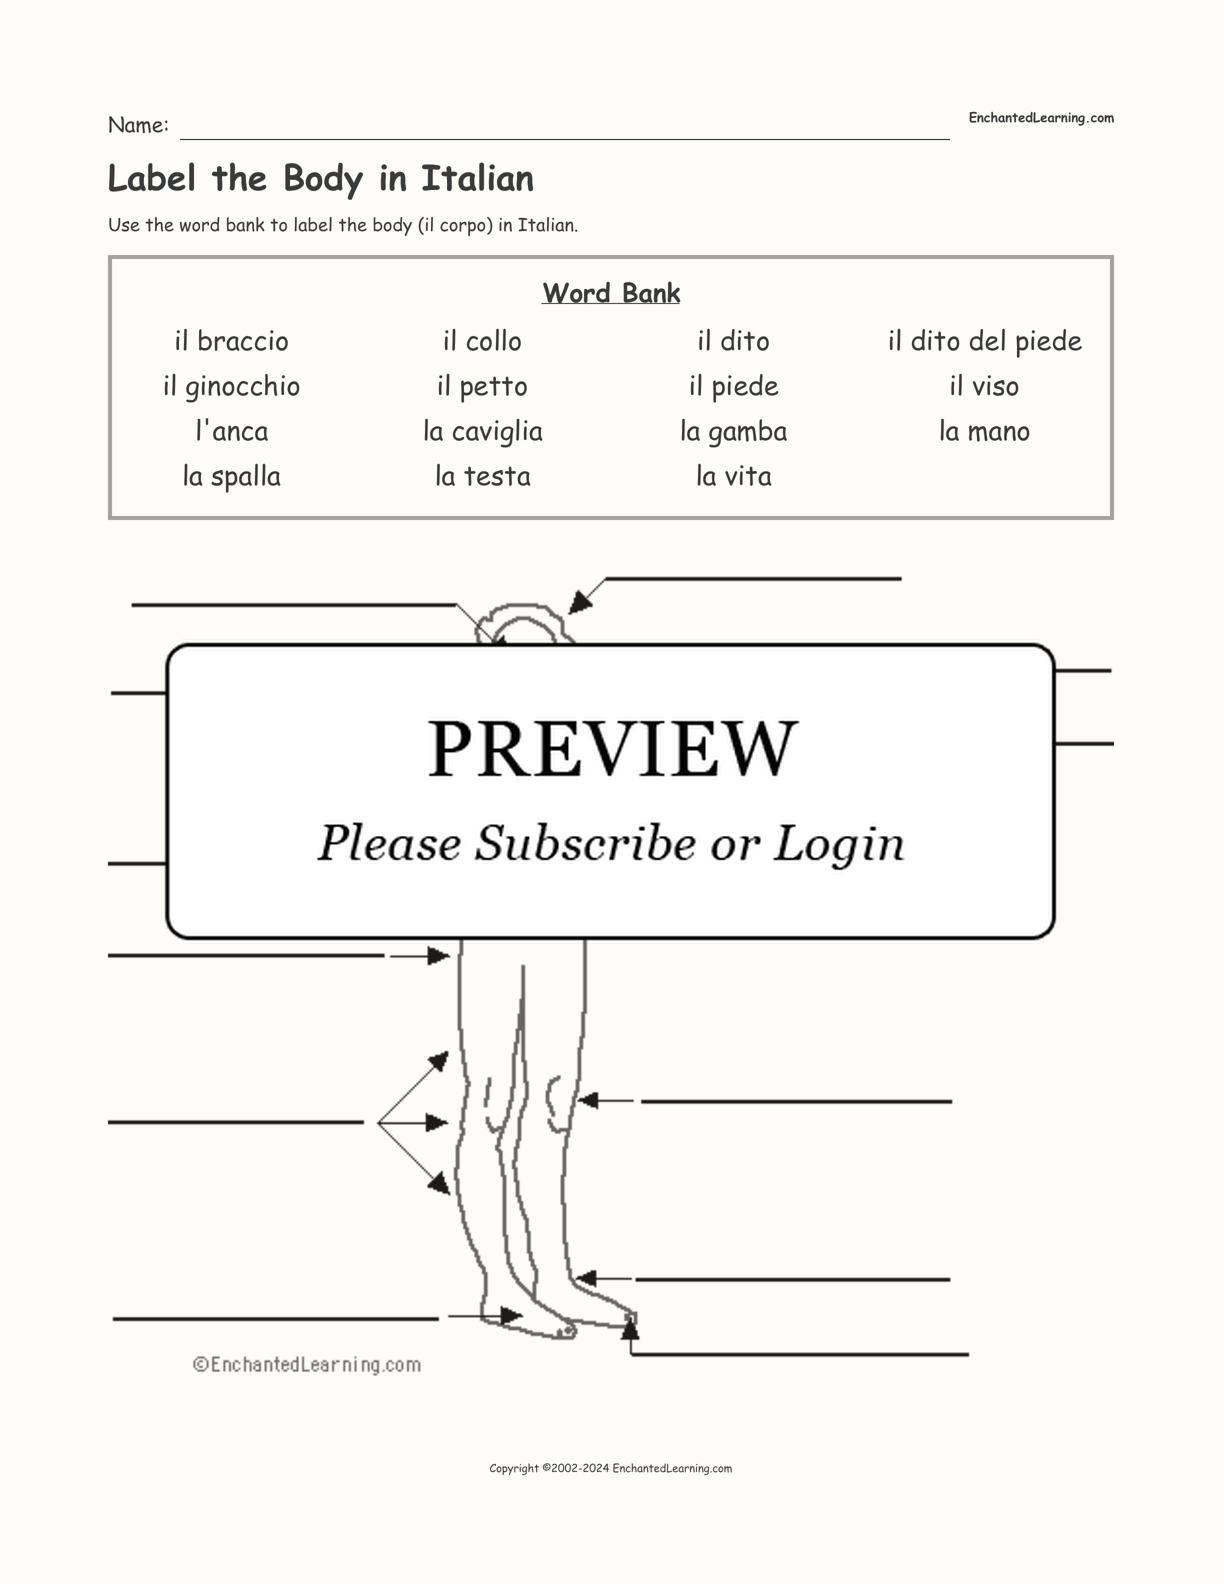 Label the Body in Italian interactive worksheet page 1